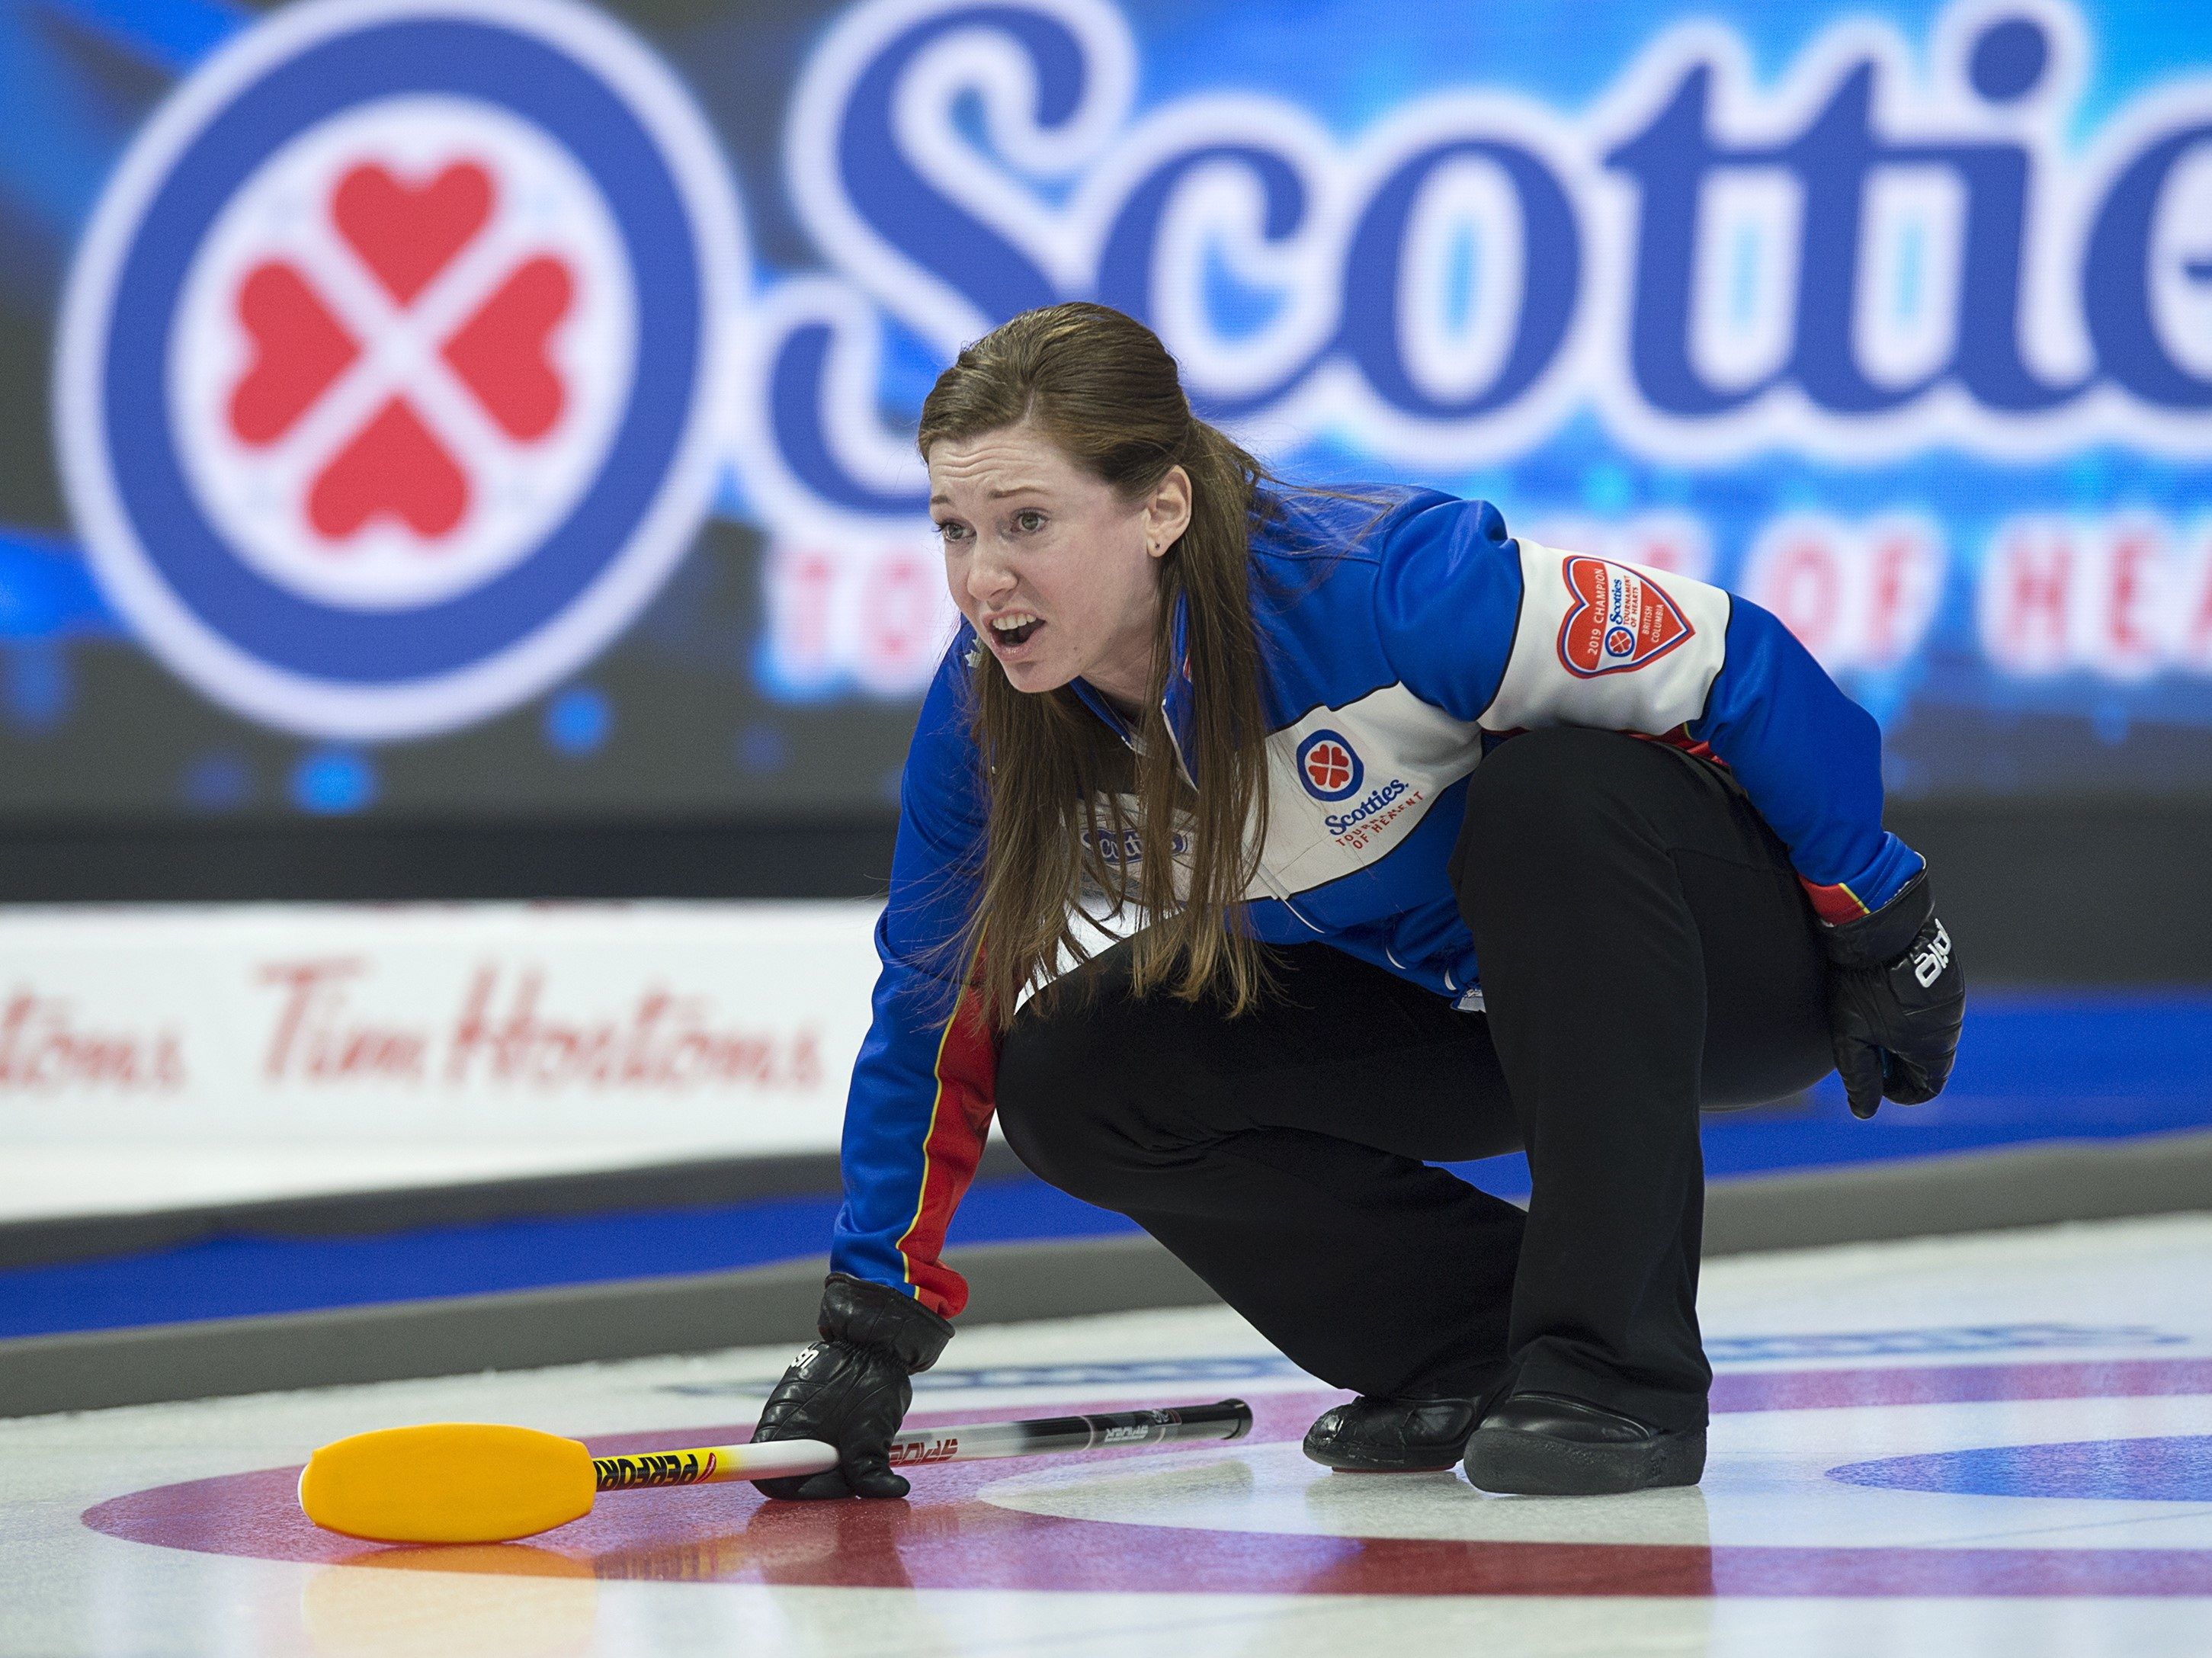 AT THE SCOTTIES Sarah Warks fun-loving personality comes out as her B.C